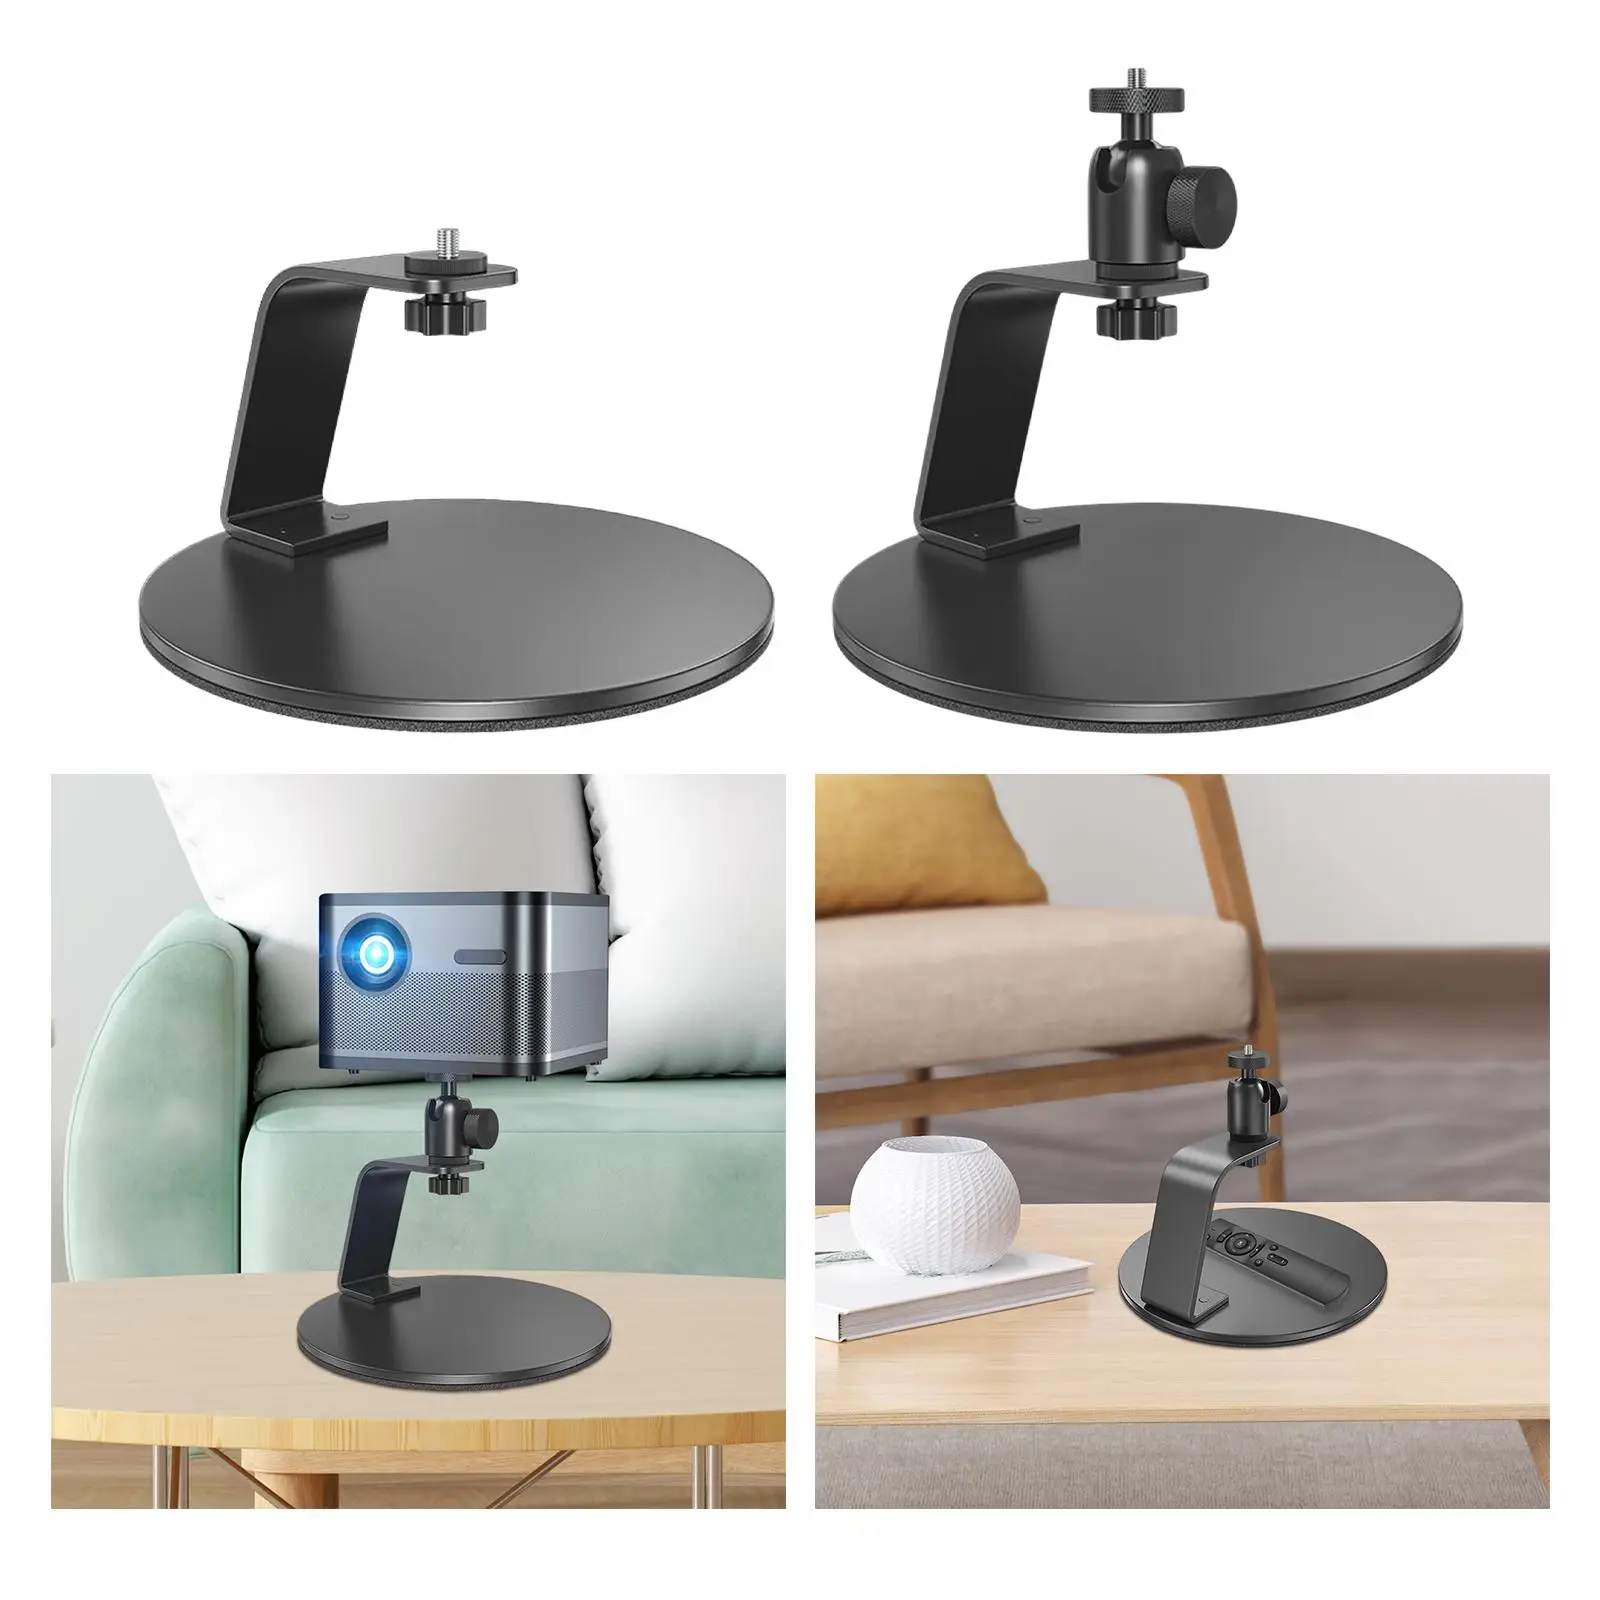 Desktop Projector Stand 360Swivel Adjustable Universal Removable Space Saving Portable Mount Stand for Bedroom Home J7 G7 x3